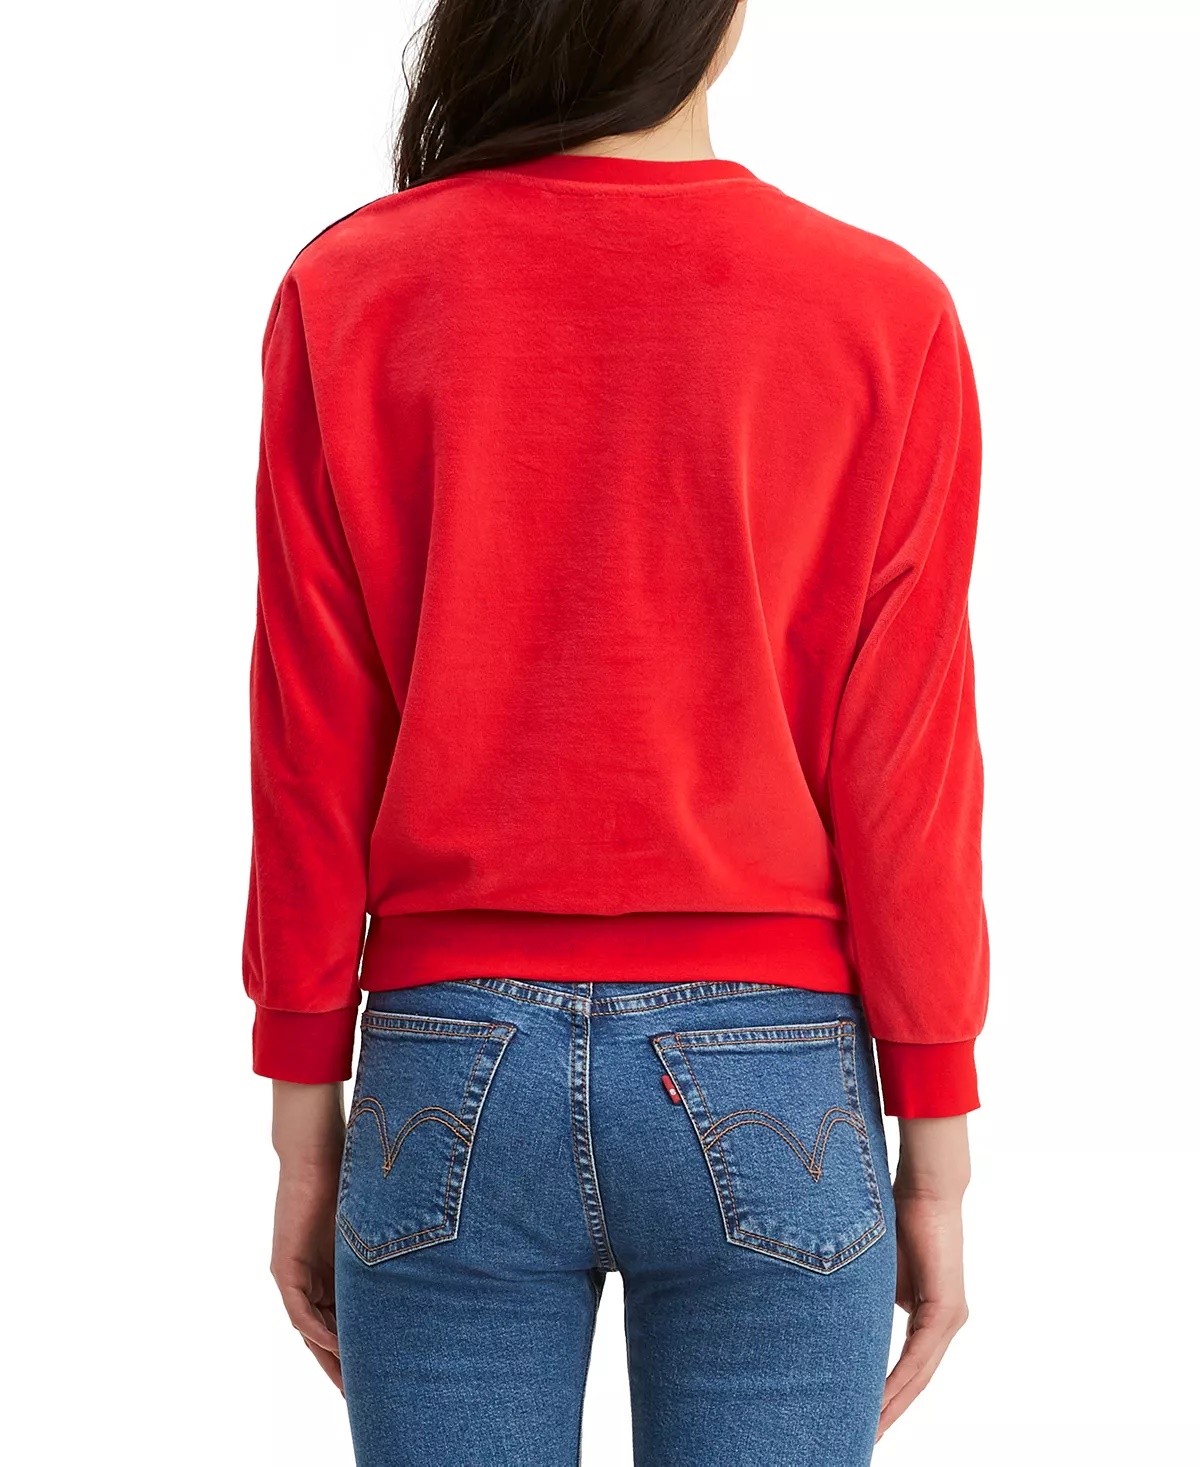 Levi's Women's Velour Dolman-Sleeve Top Red Size X-Small